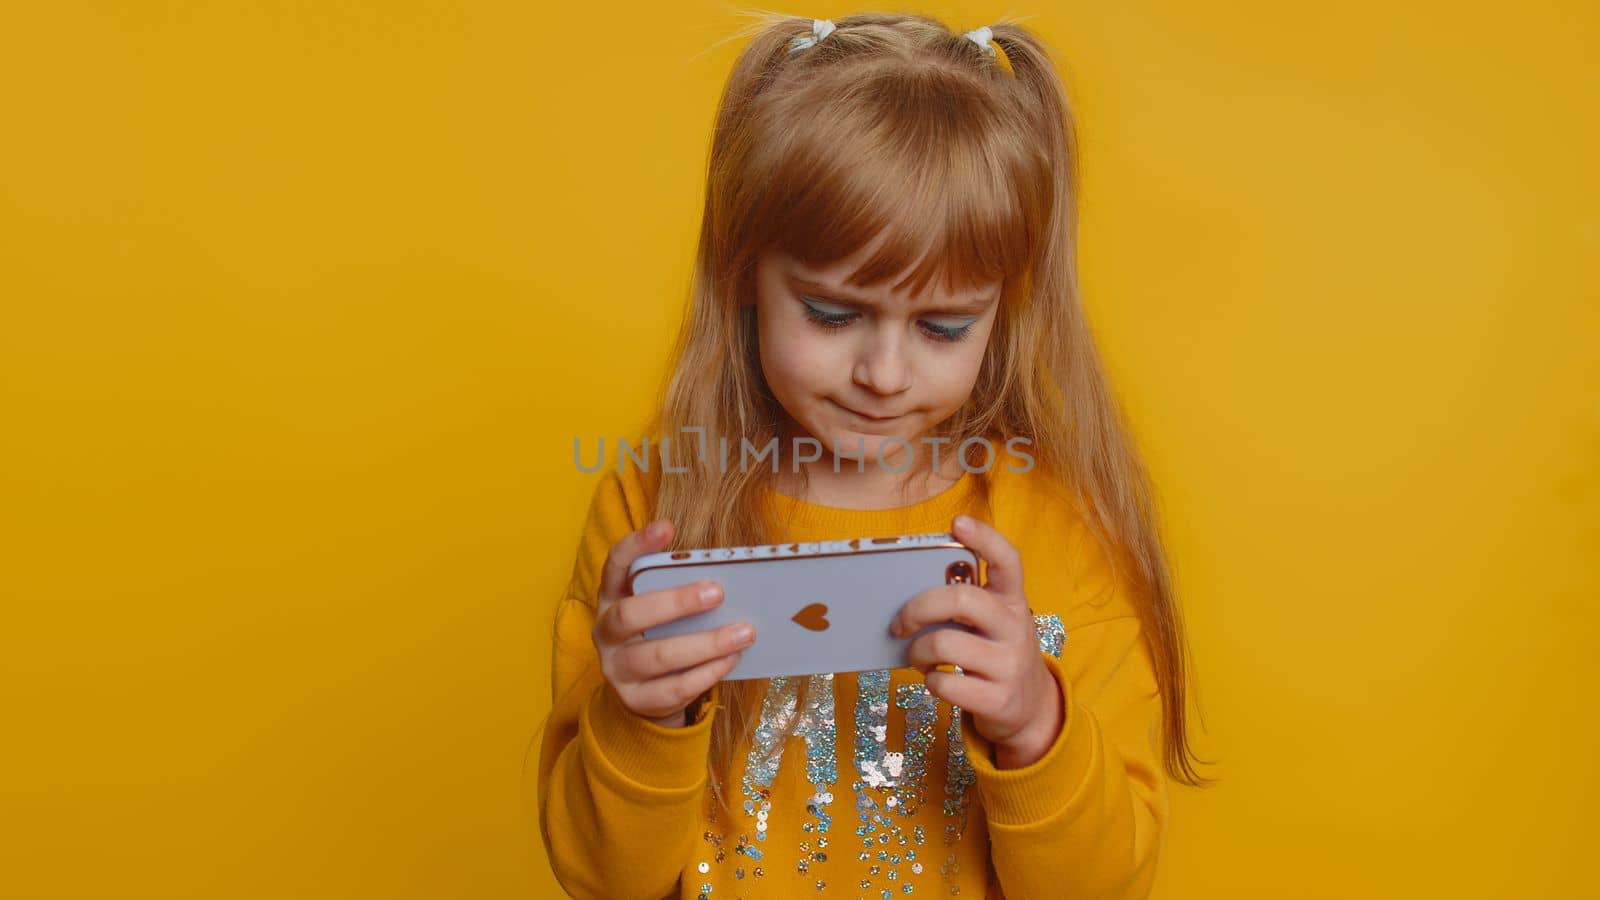 Worried funny young preteen child girl kid enthusiastically playing racing or shooter video games on smartphone. Excited little cute toddler children using mobile phone gadget app with drive simulator